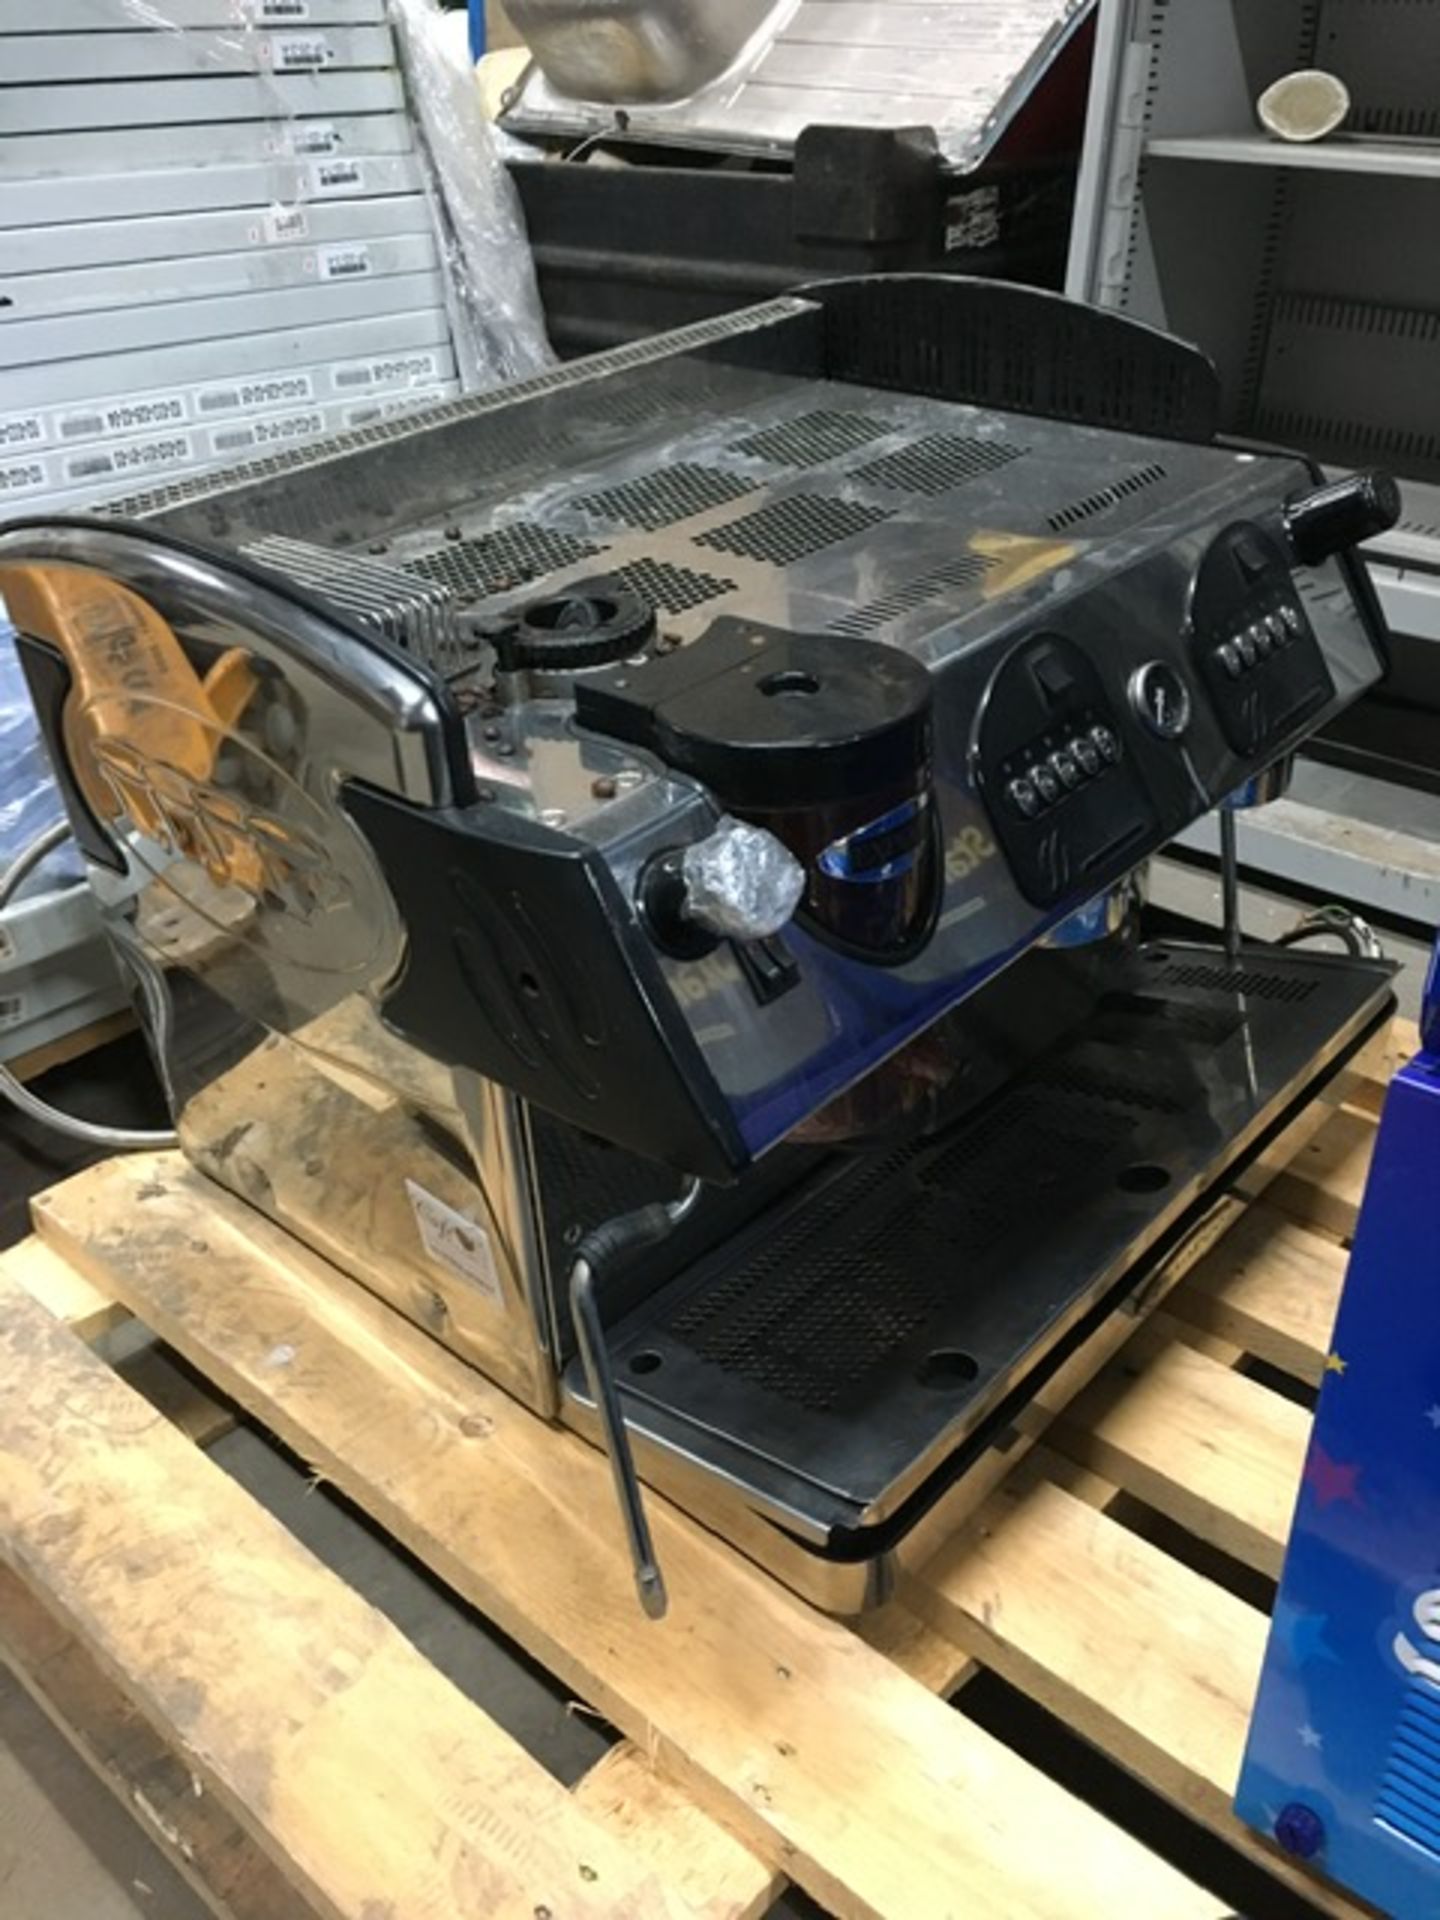 Stafco Expobar 2 Cup Coffee Machine - Image 2 of 2